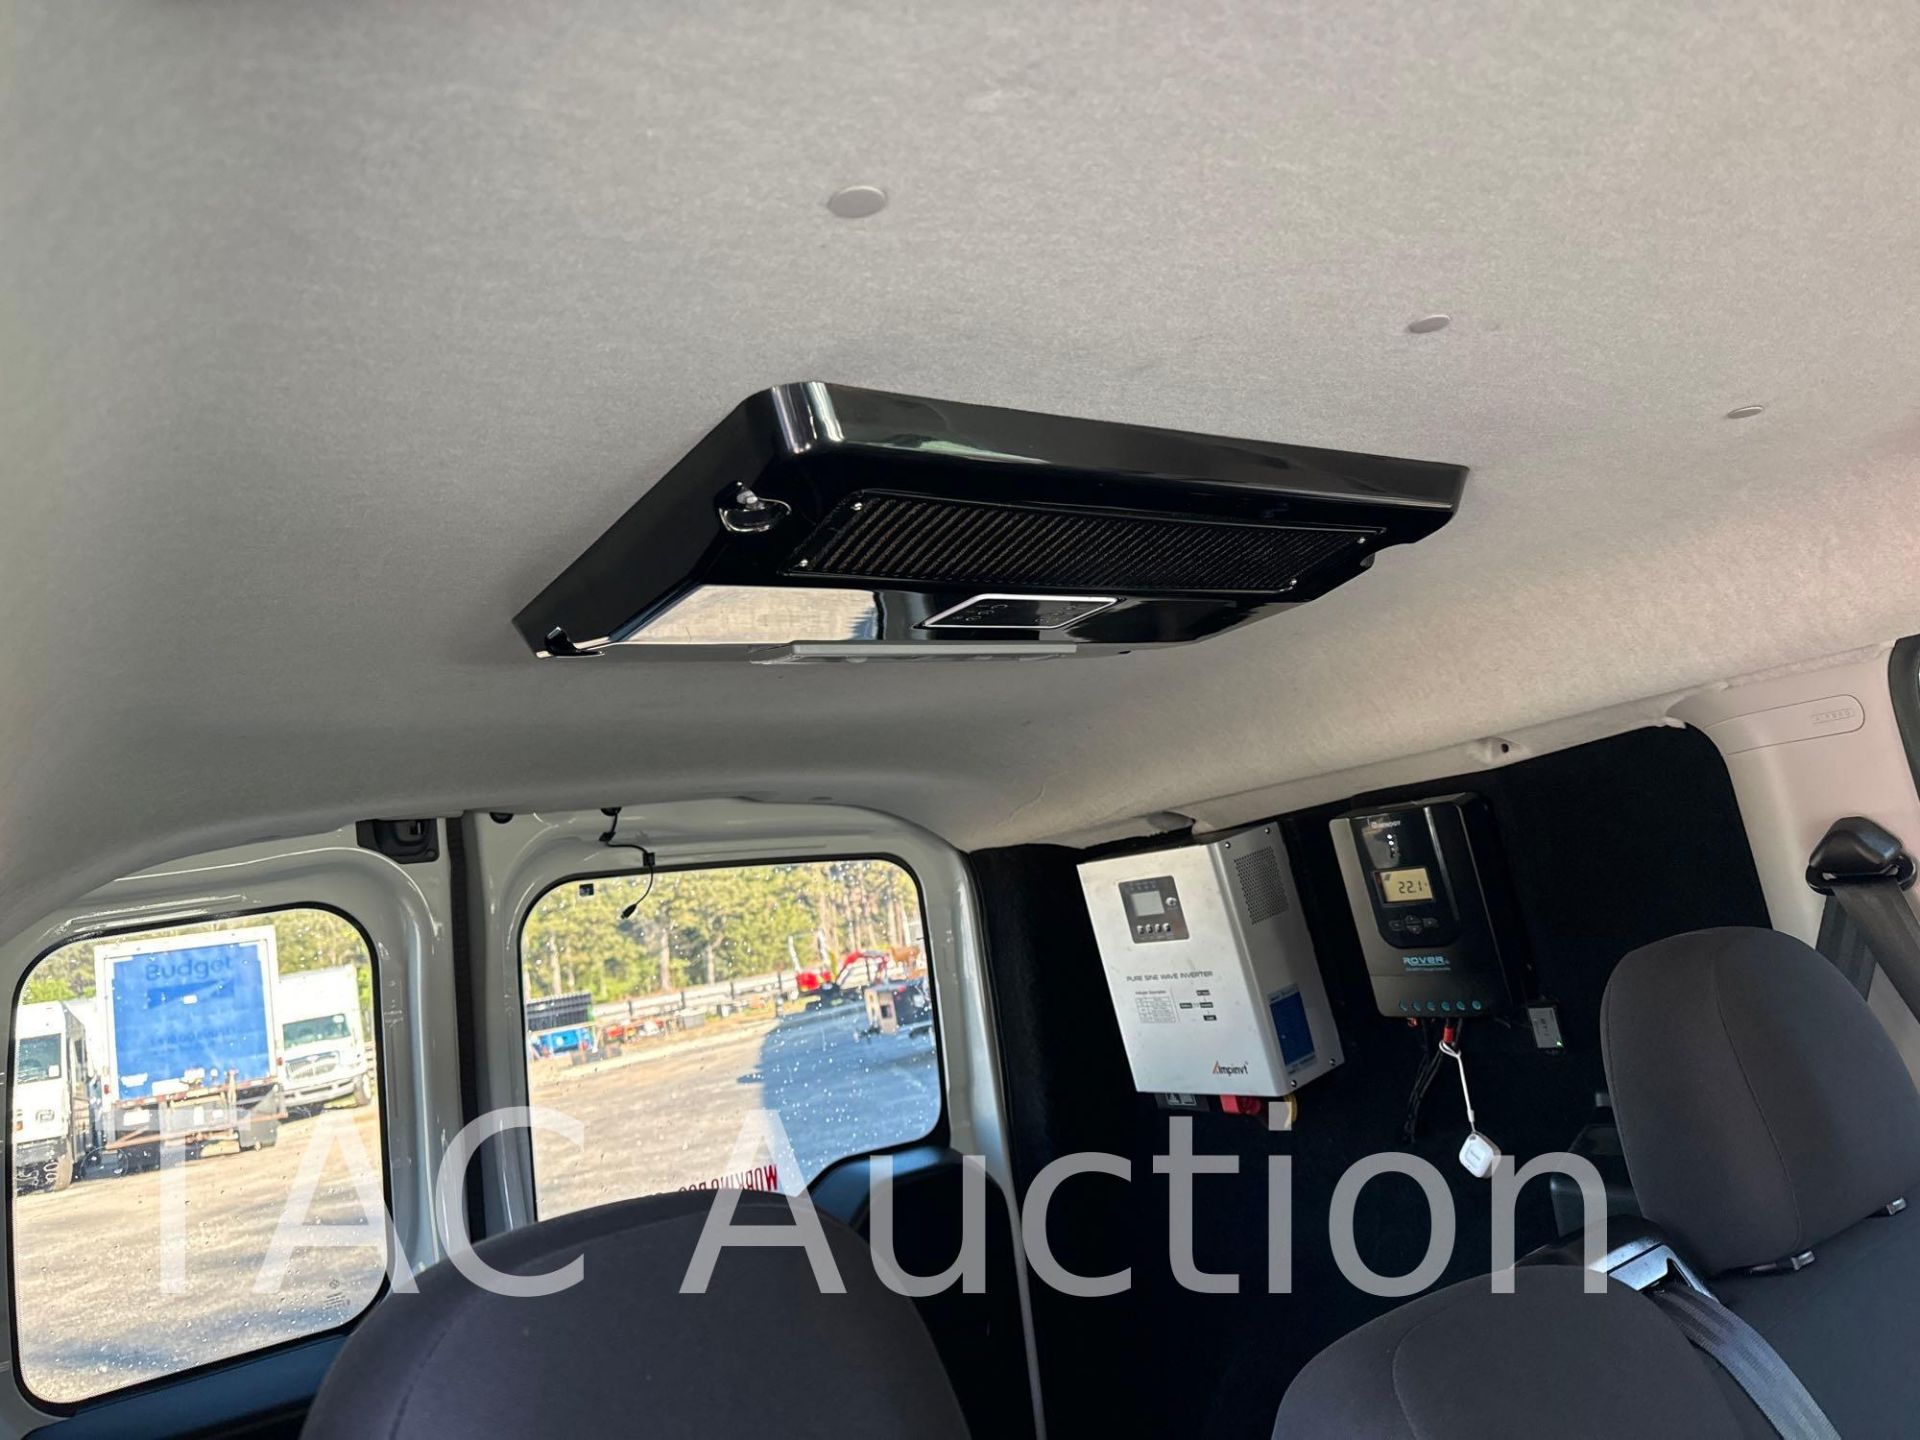 2022 Ram ProMaster City 2500 Climate Controlled Sprinter Van - Image 24 of 45